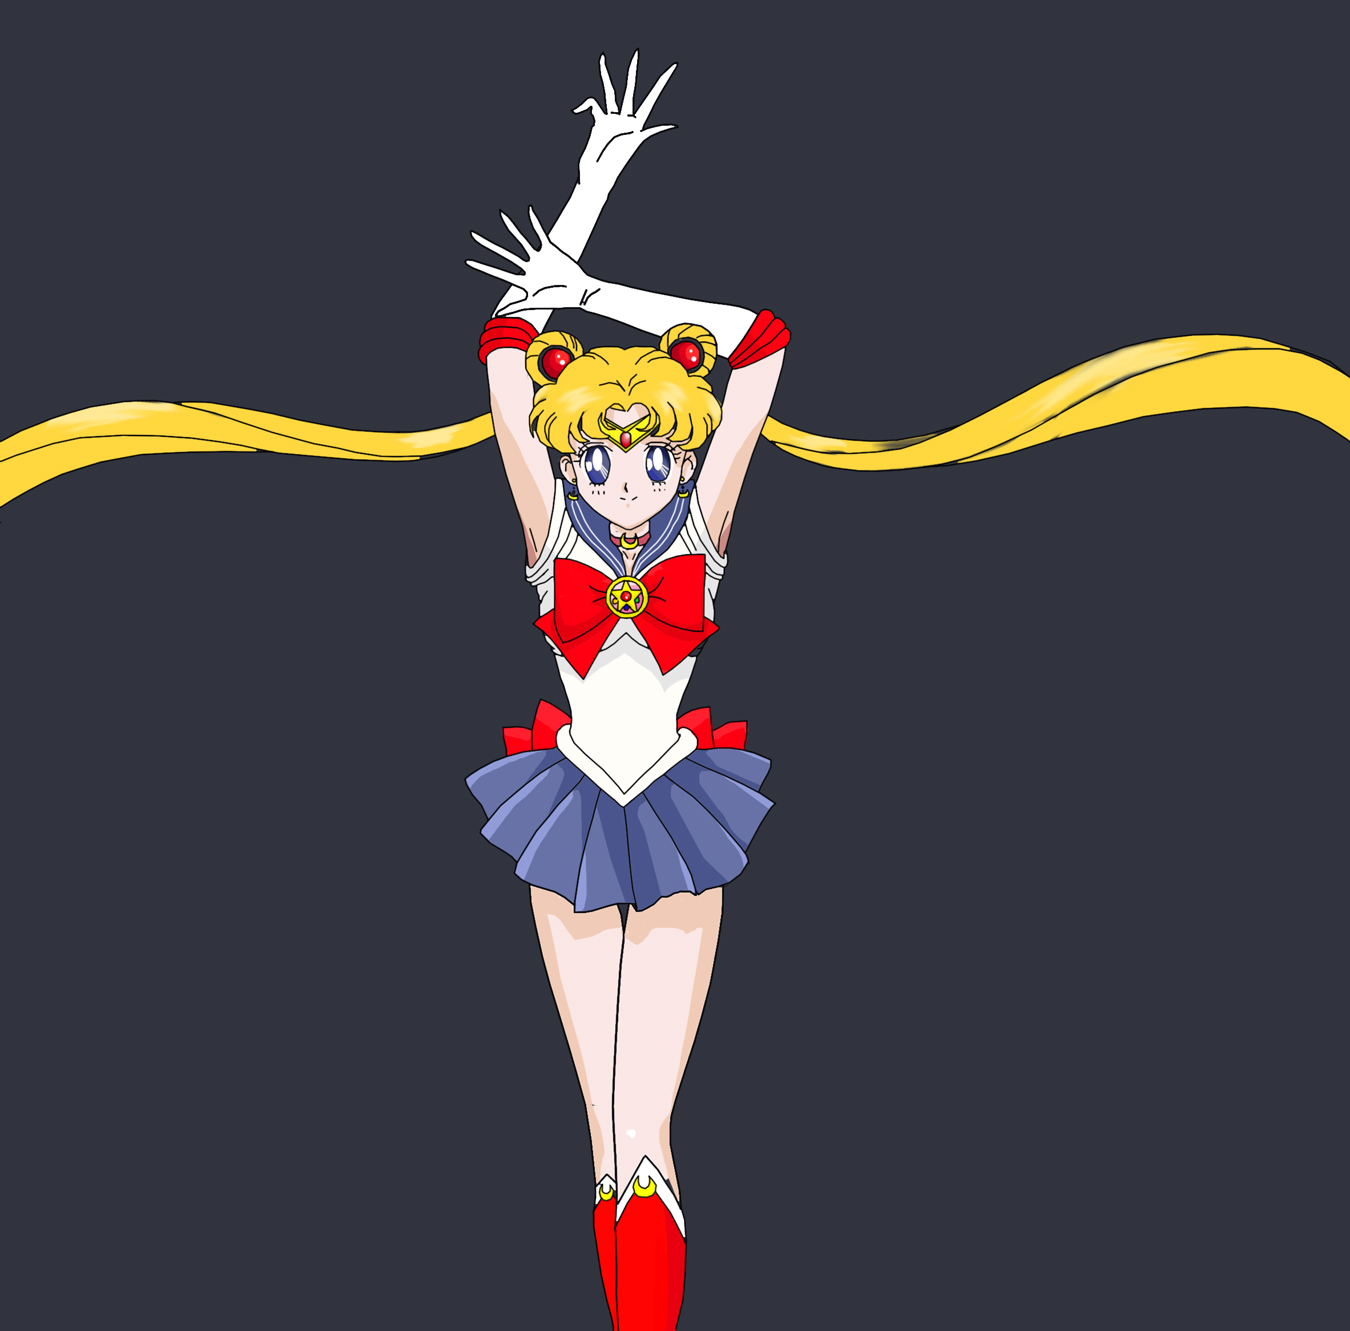 Vector Images for 'Sailor moon'. 